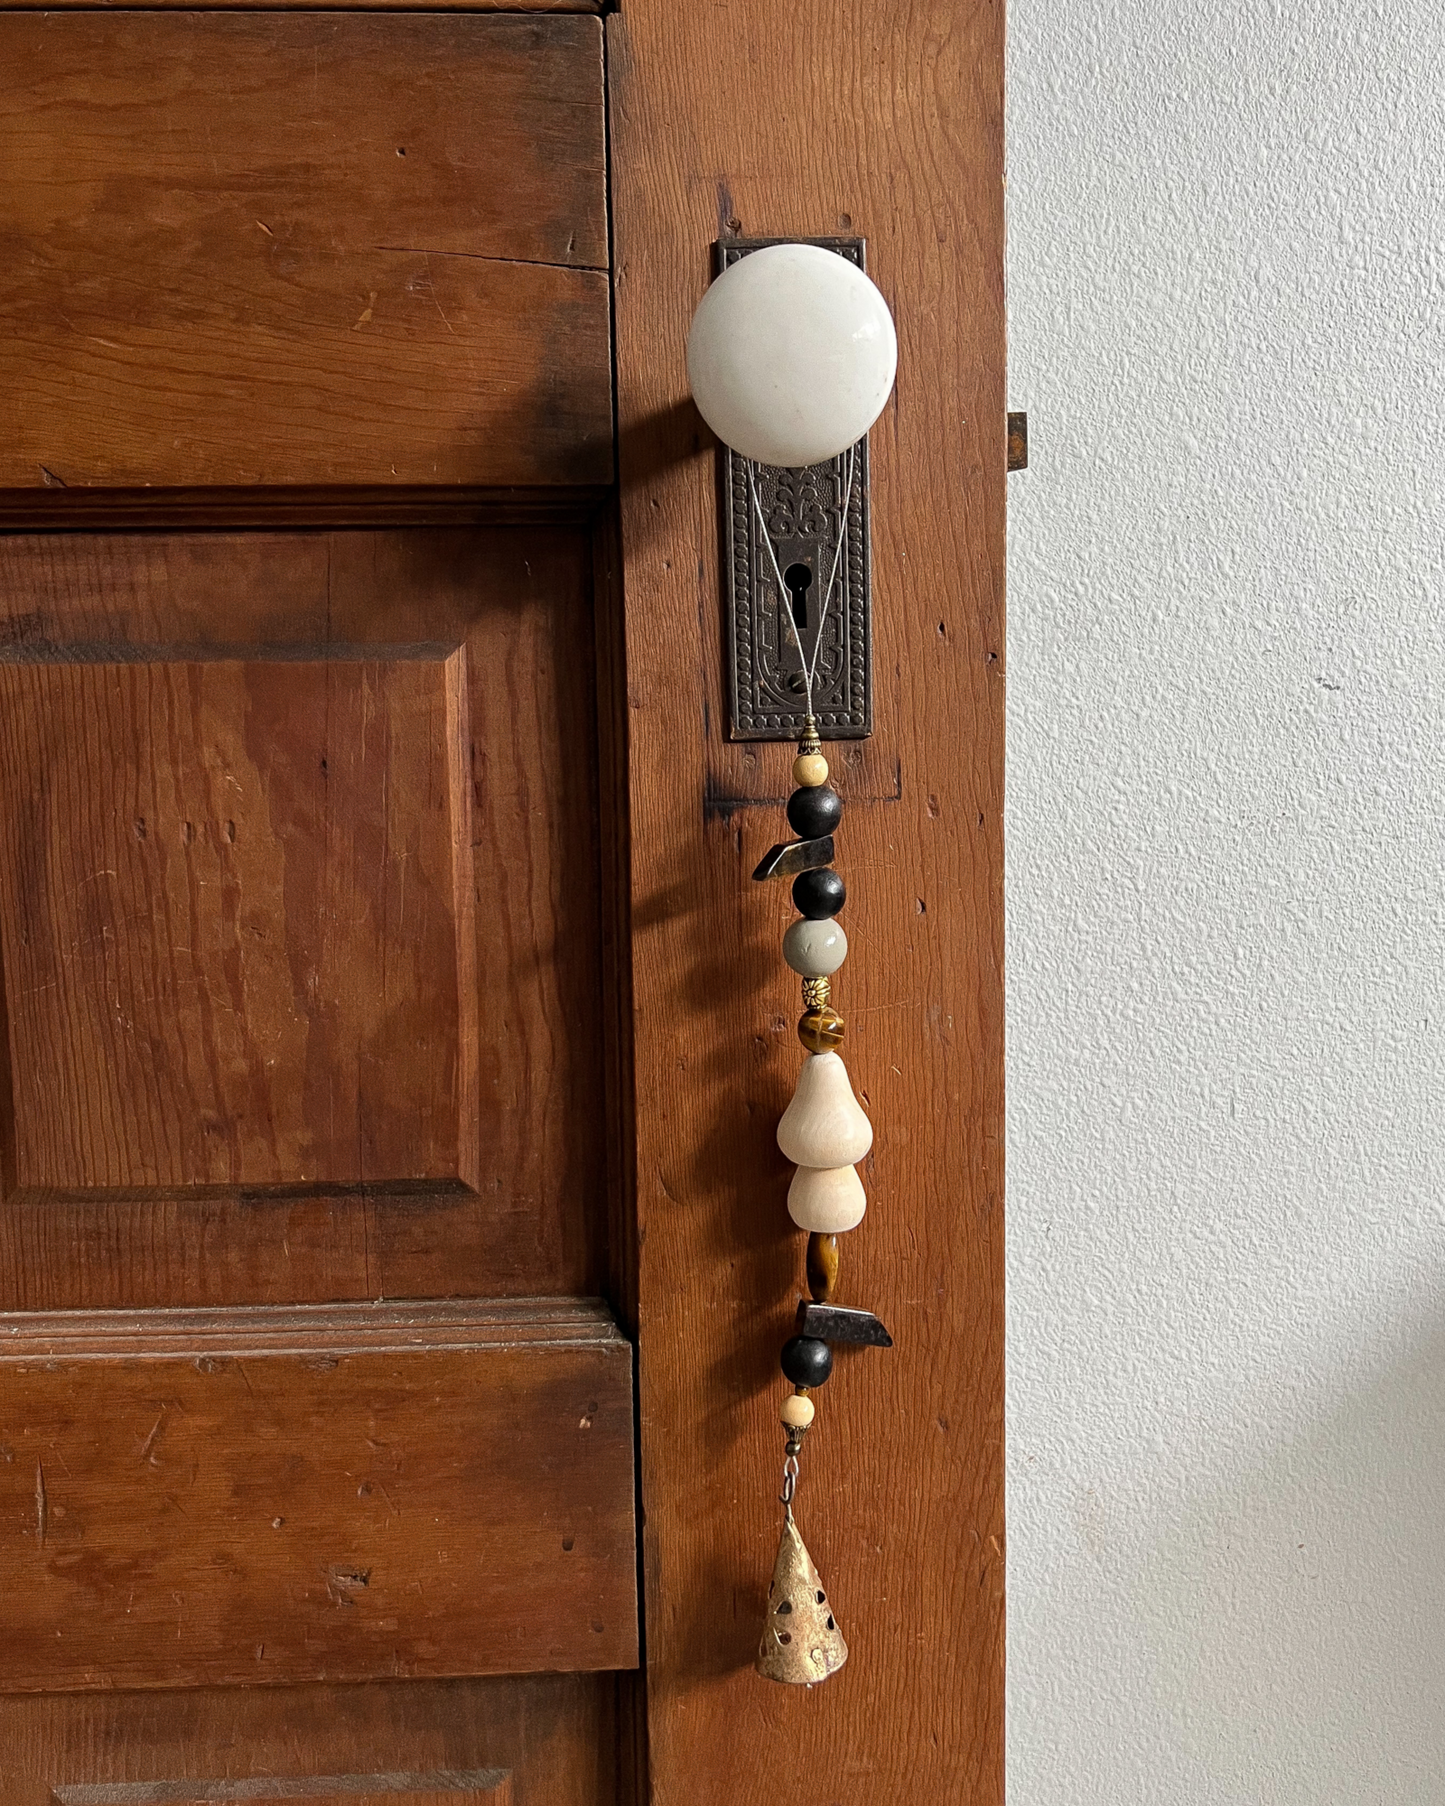 Single strand of wooden beads, tigers eye crystals, and a golden bell hang from an antique doorknob.